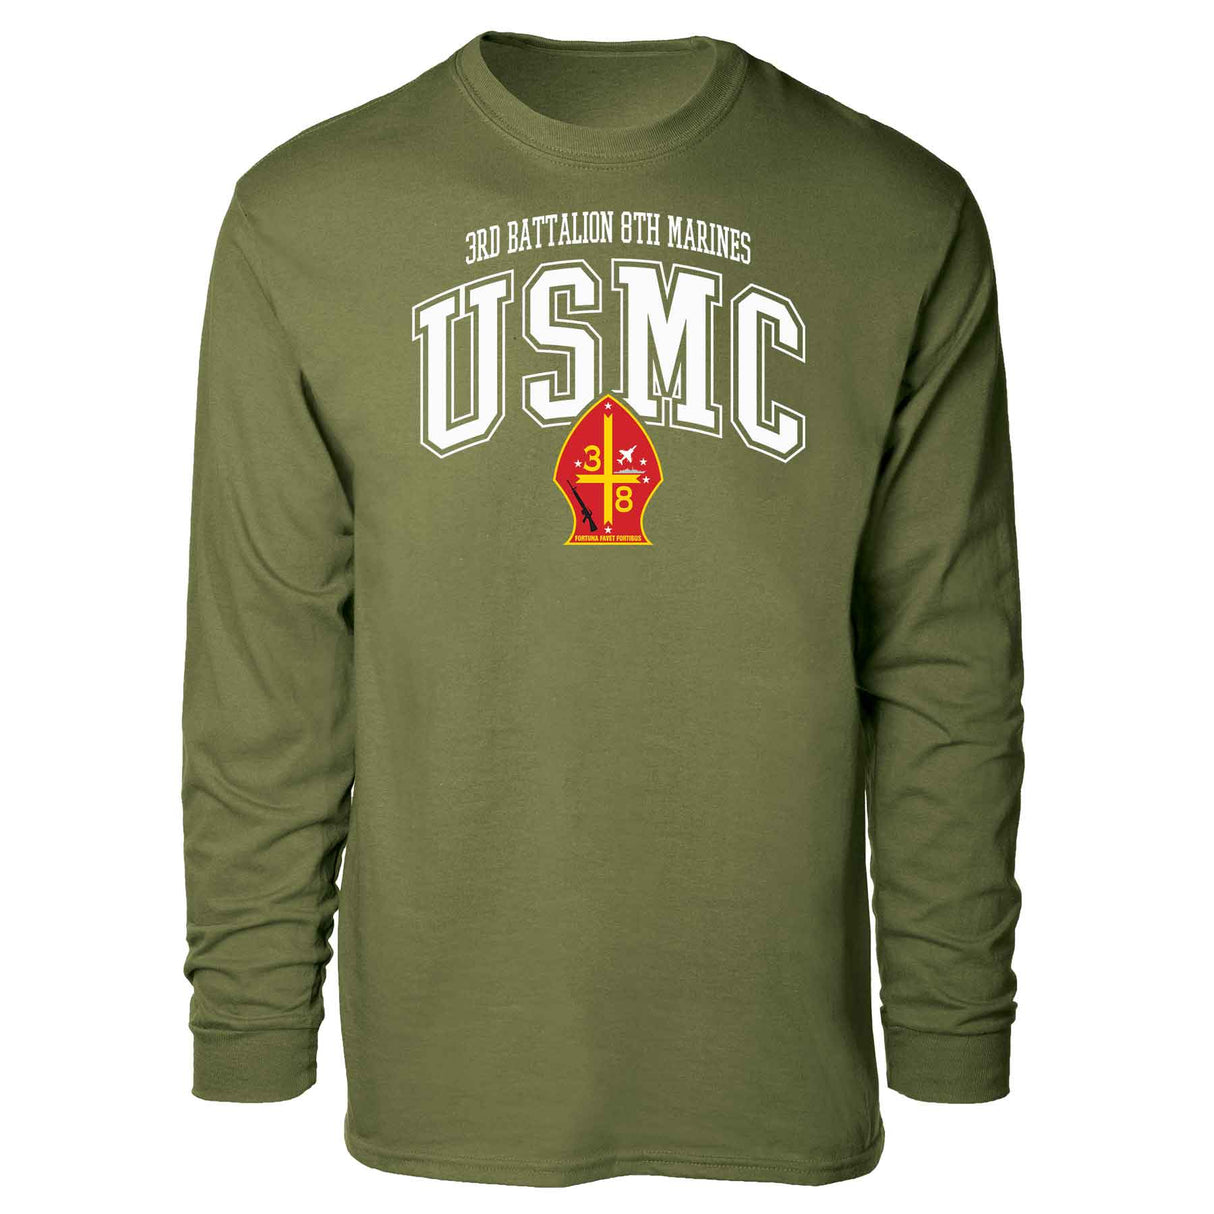 3rd Battalion 8th Marines Arched Long Sleeve T-shirt - SGT GRIT